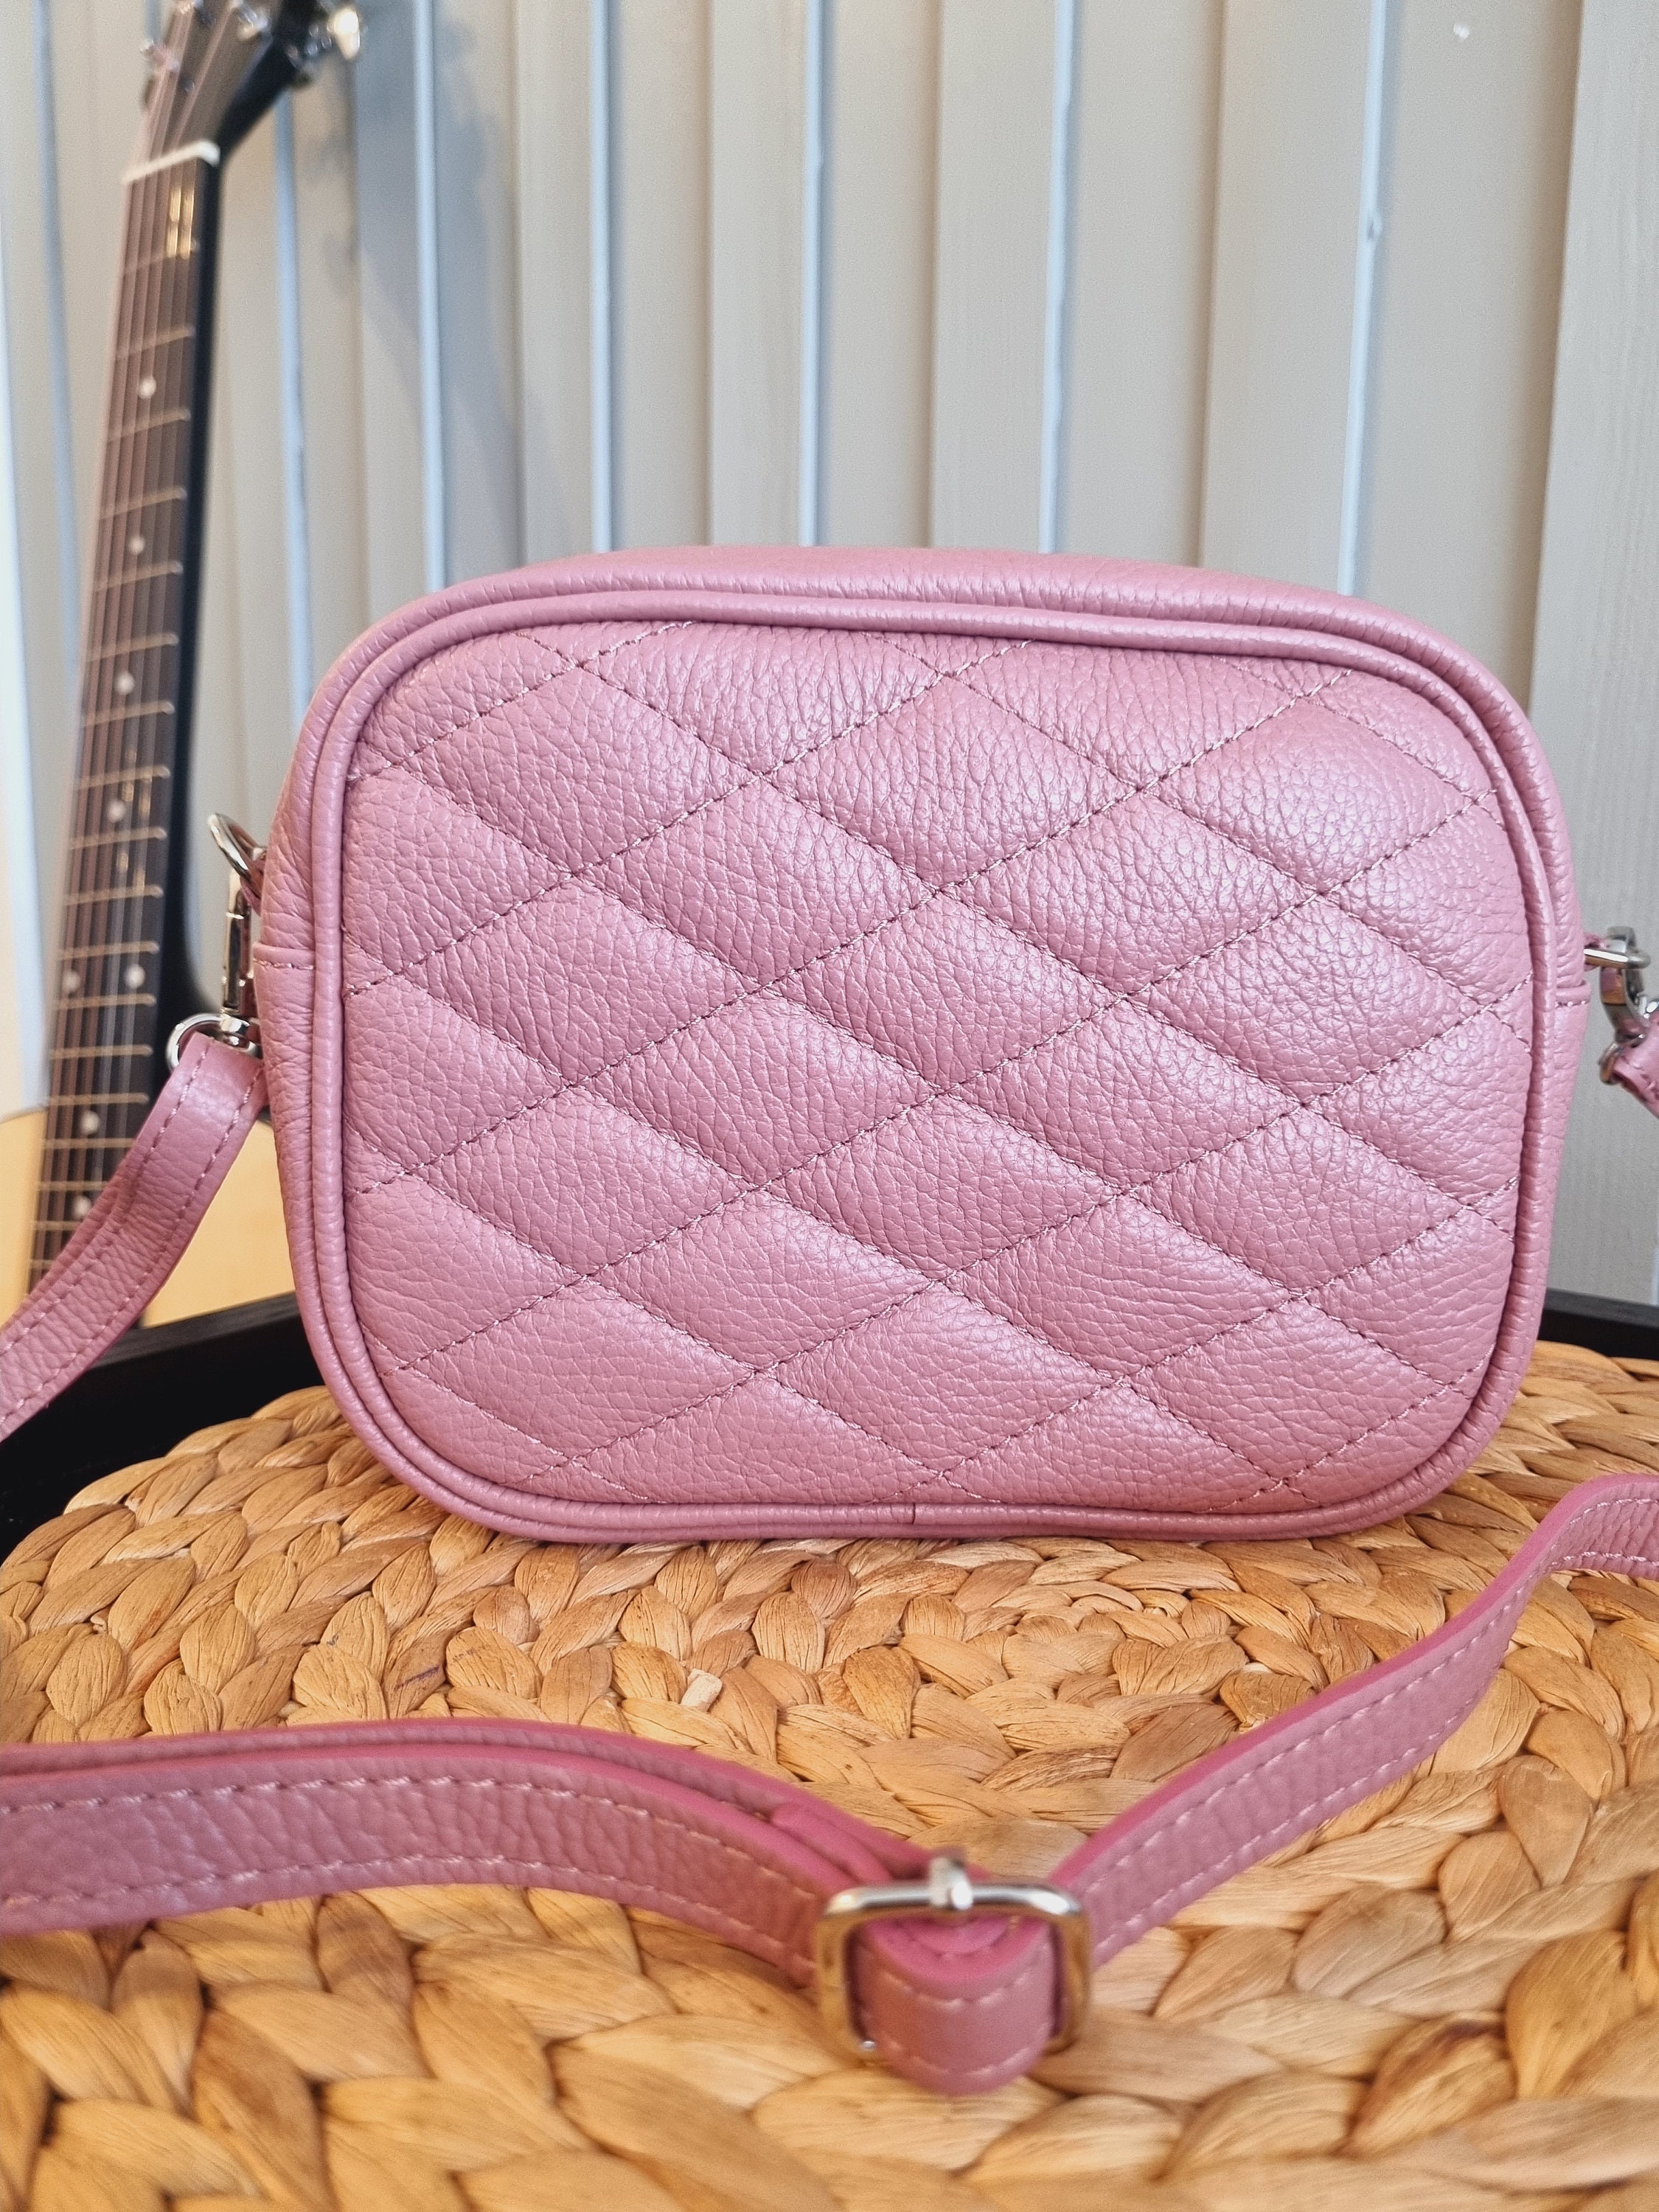 Quilted Pink Crossbody Bag/Pink Leather Bag/ Pink Bag/ Leather Crossbody/Pink Shoulder Bag First Anniversary Gift, Gifts for Her